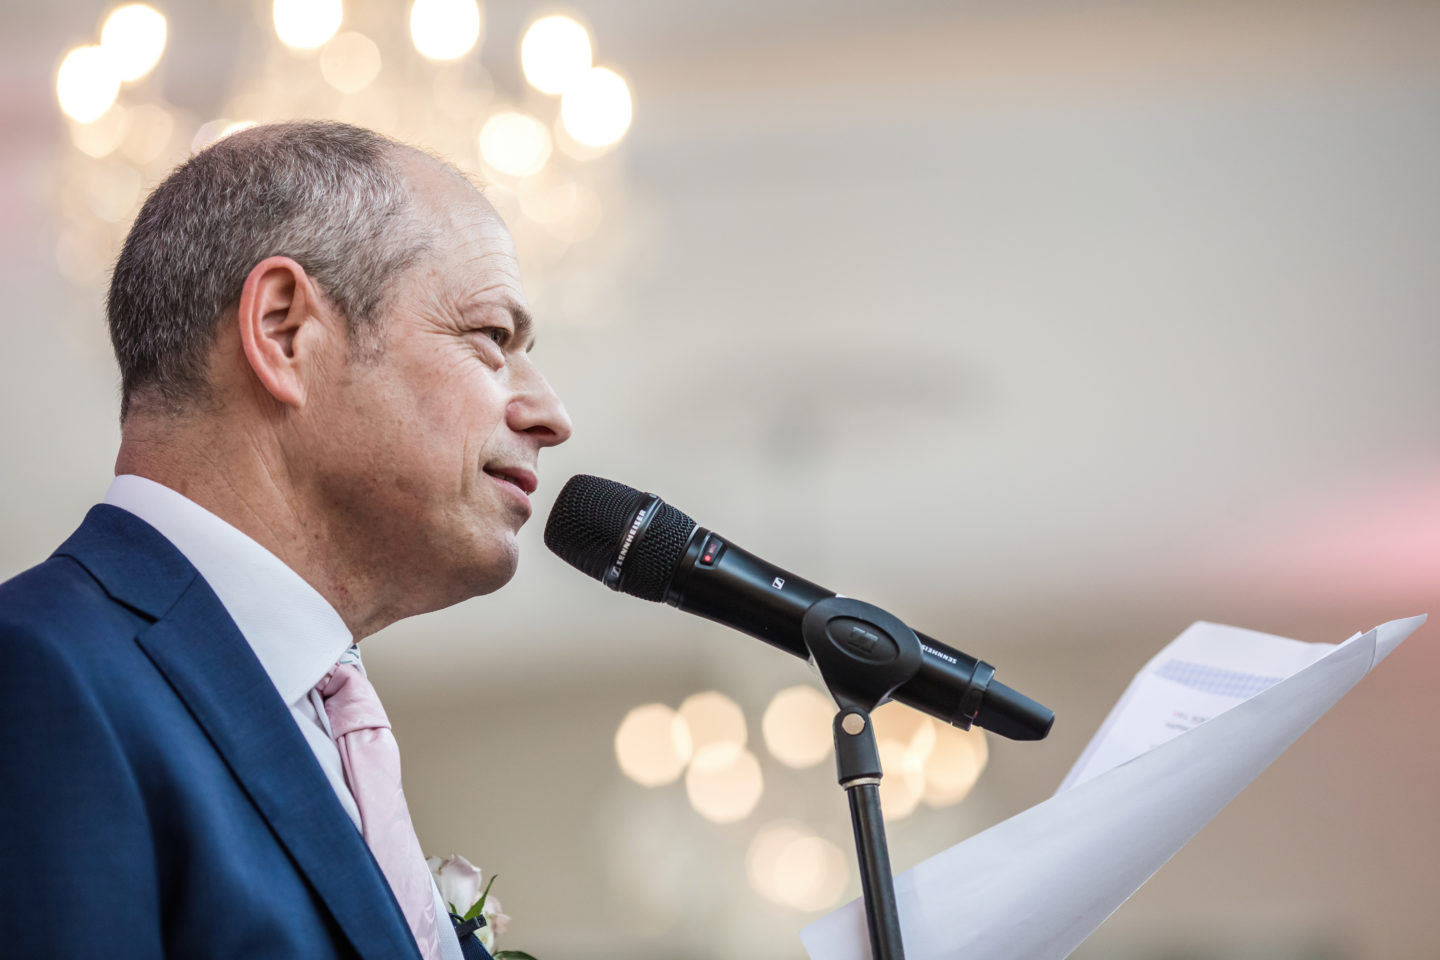 Father of the Bride wedding speech top tips